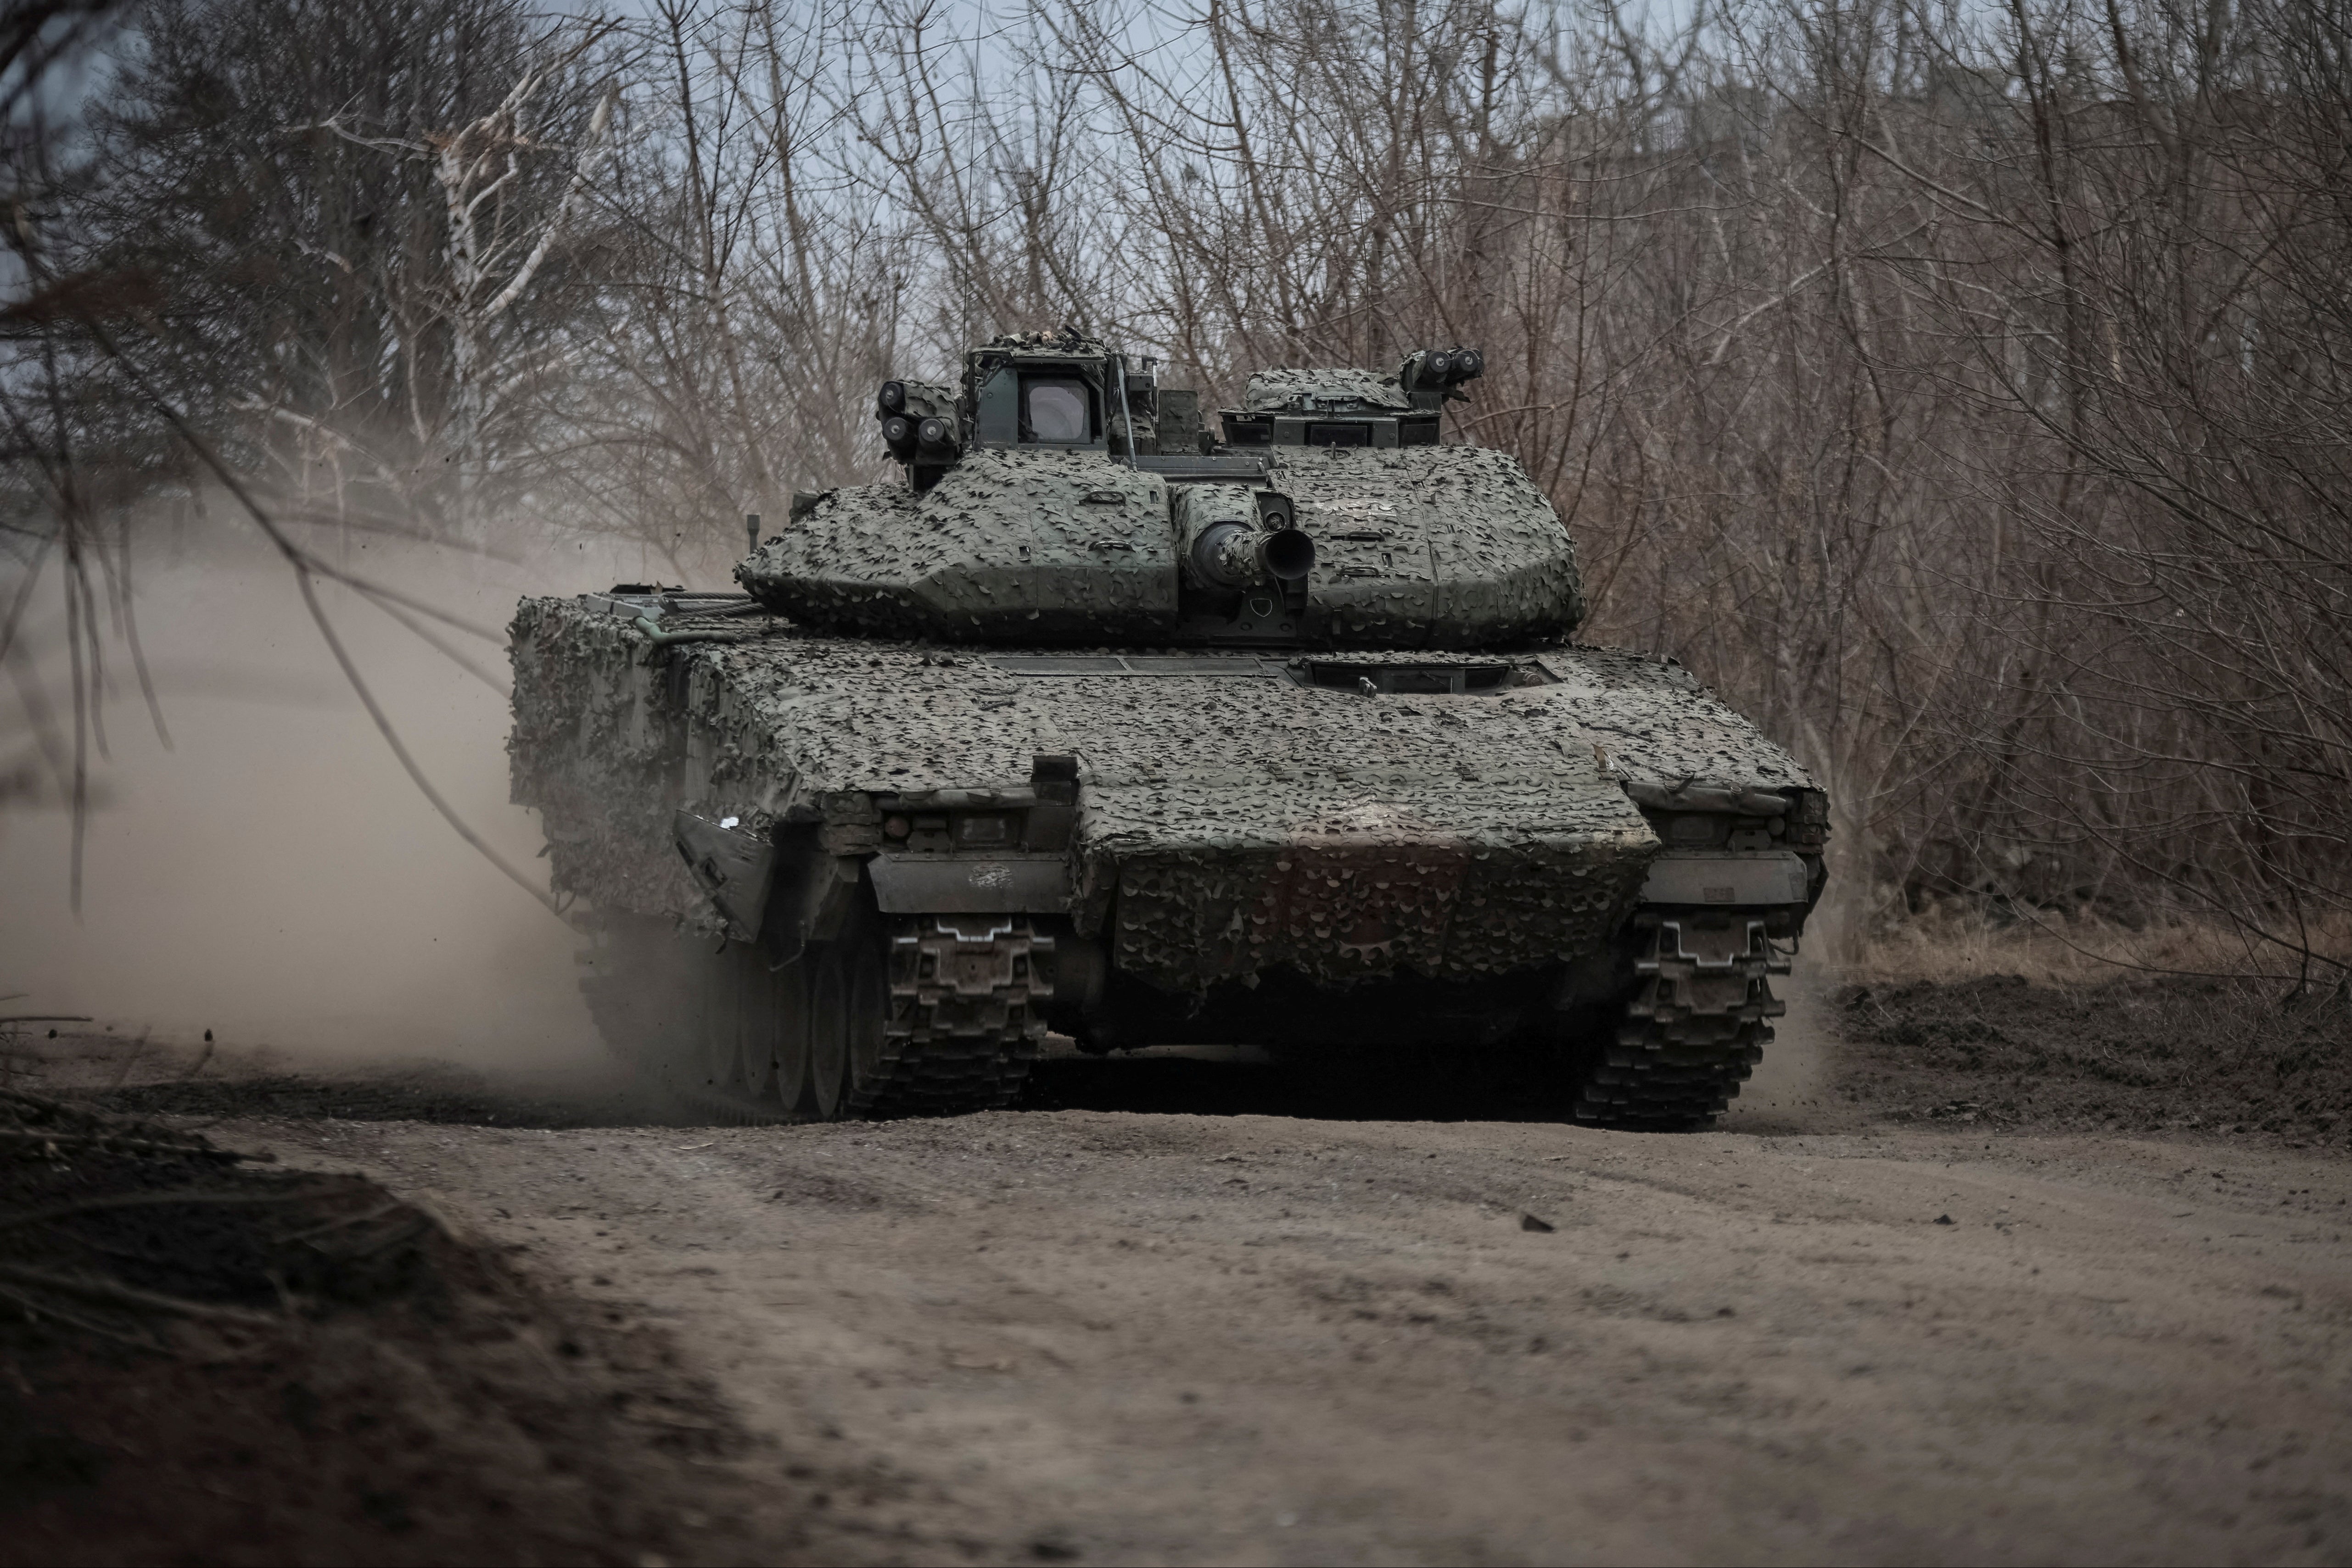 A Ukrainian CV-90 armoured vehicle pictured in March near the frontline town of Chasiv Yar